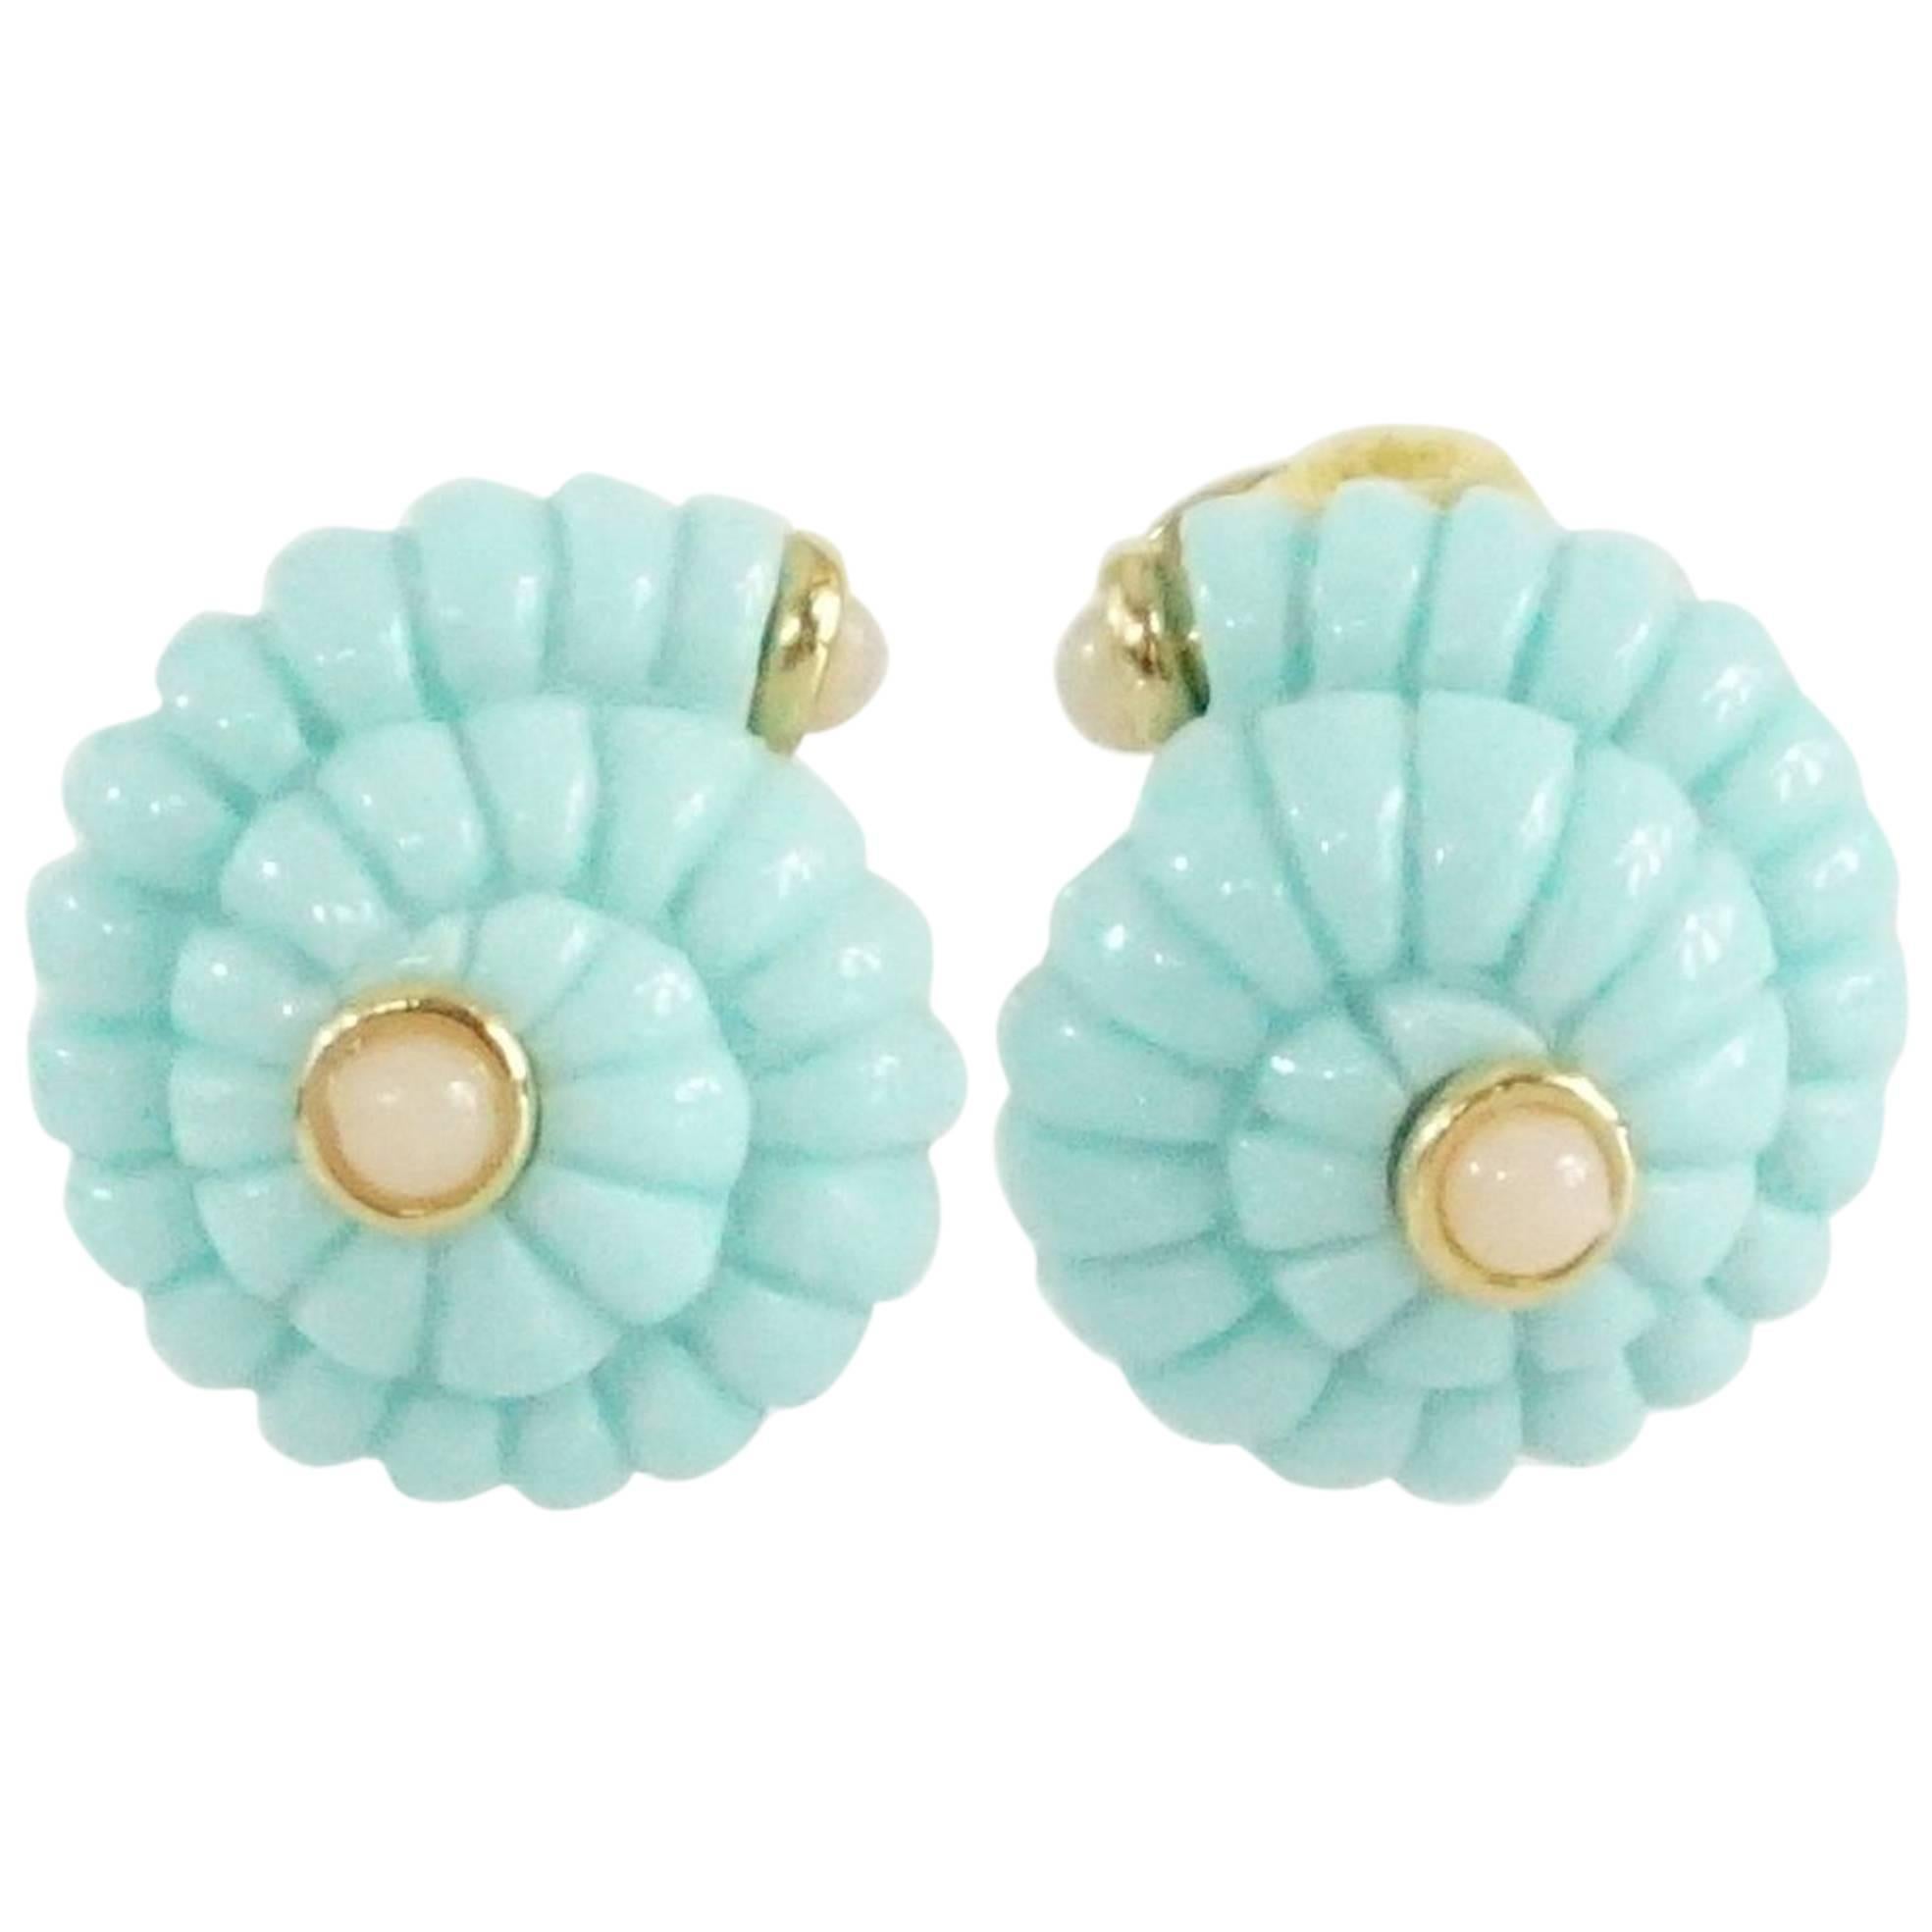 Replica Light Blue Spiral with Light Pink Stones Clip Earrings